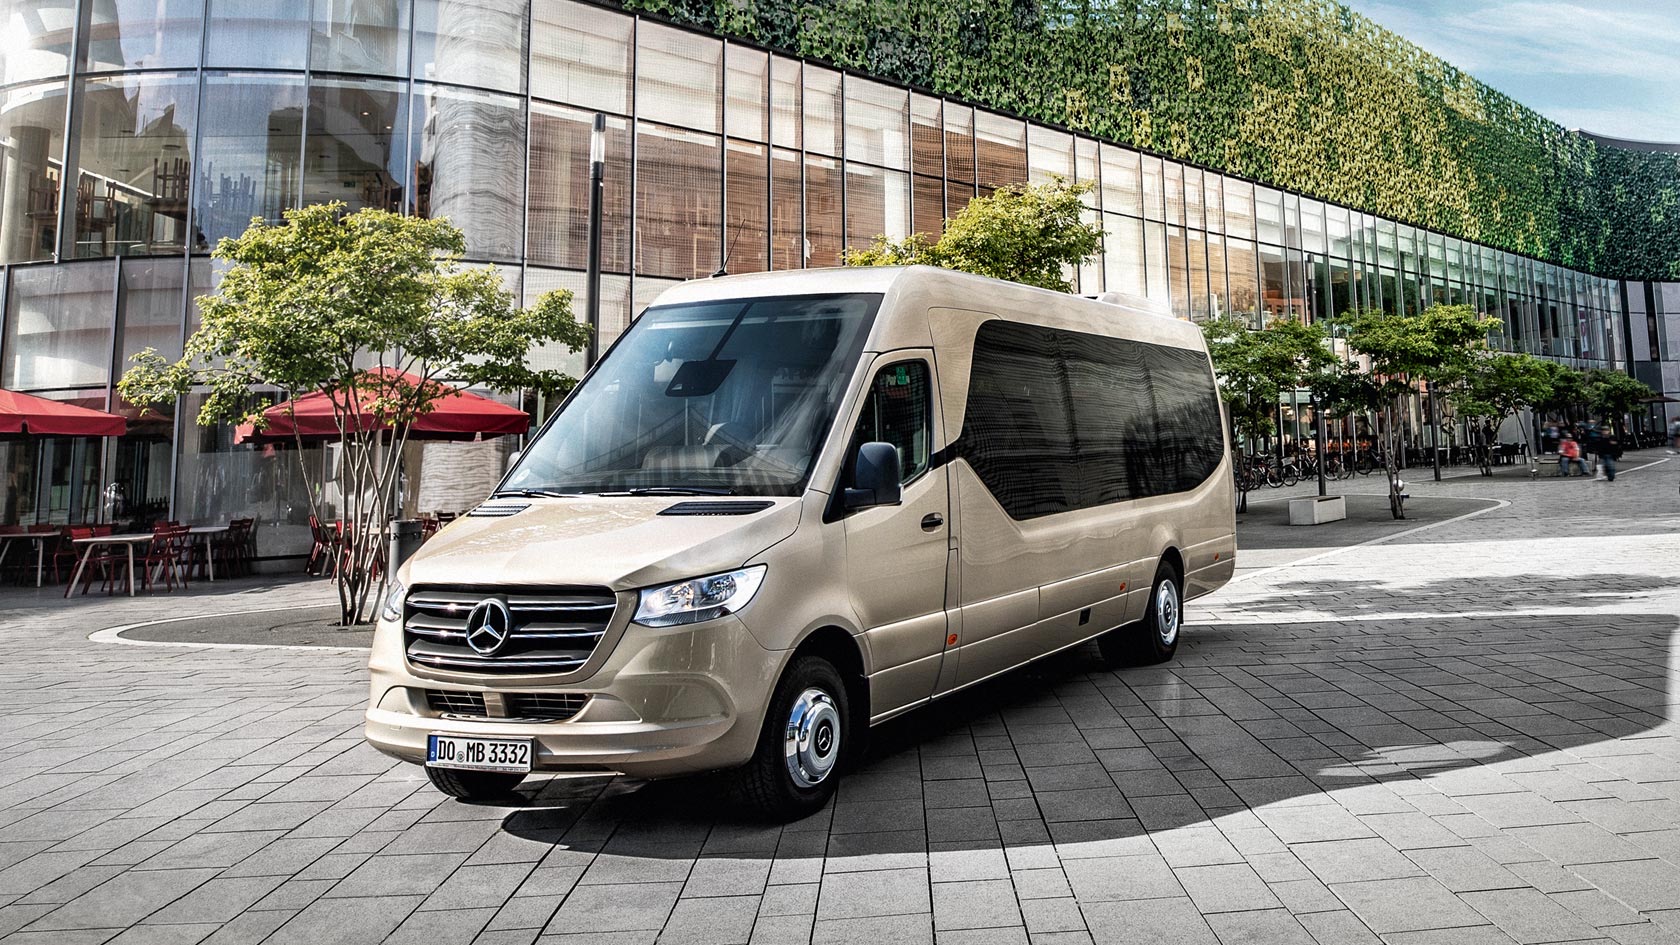 What to Look for When Hiring a 16 Seater Minibus for Your Event in Newport